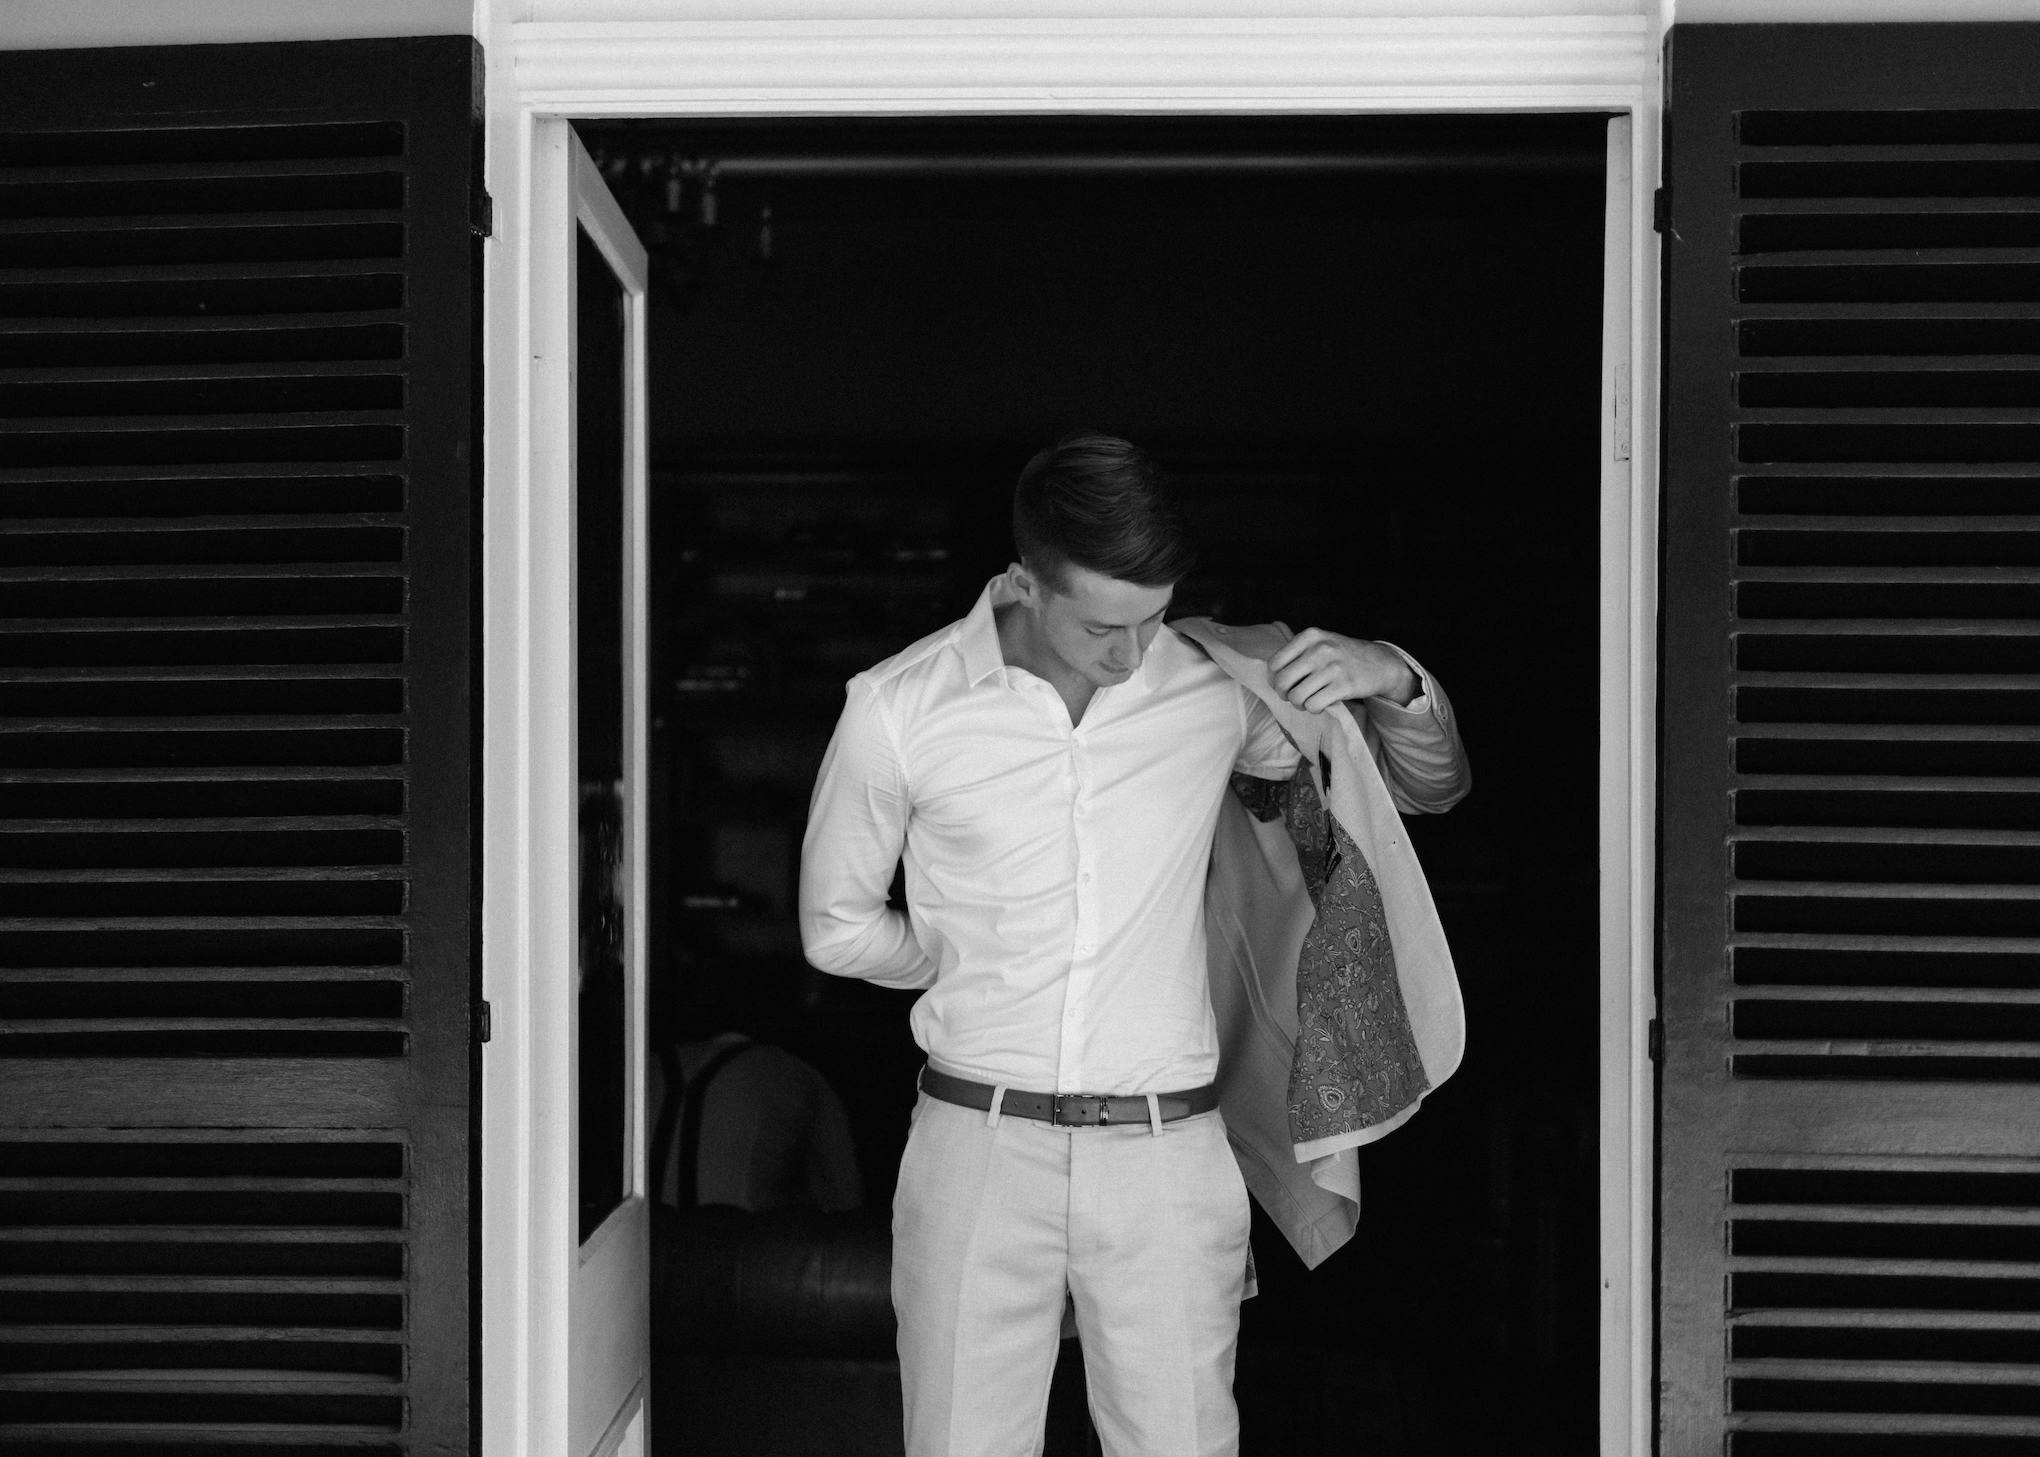 A man stands in an open doorway with dark shutters, putting on a blazer over his light-colored shirt and pants. He looks down and adjusts the jacket, preparing himself. The image is in black and white.